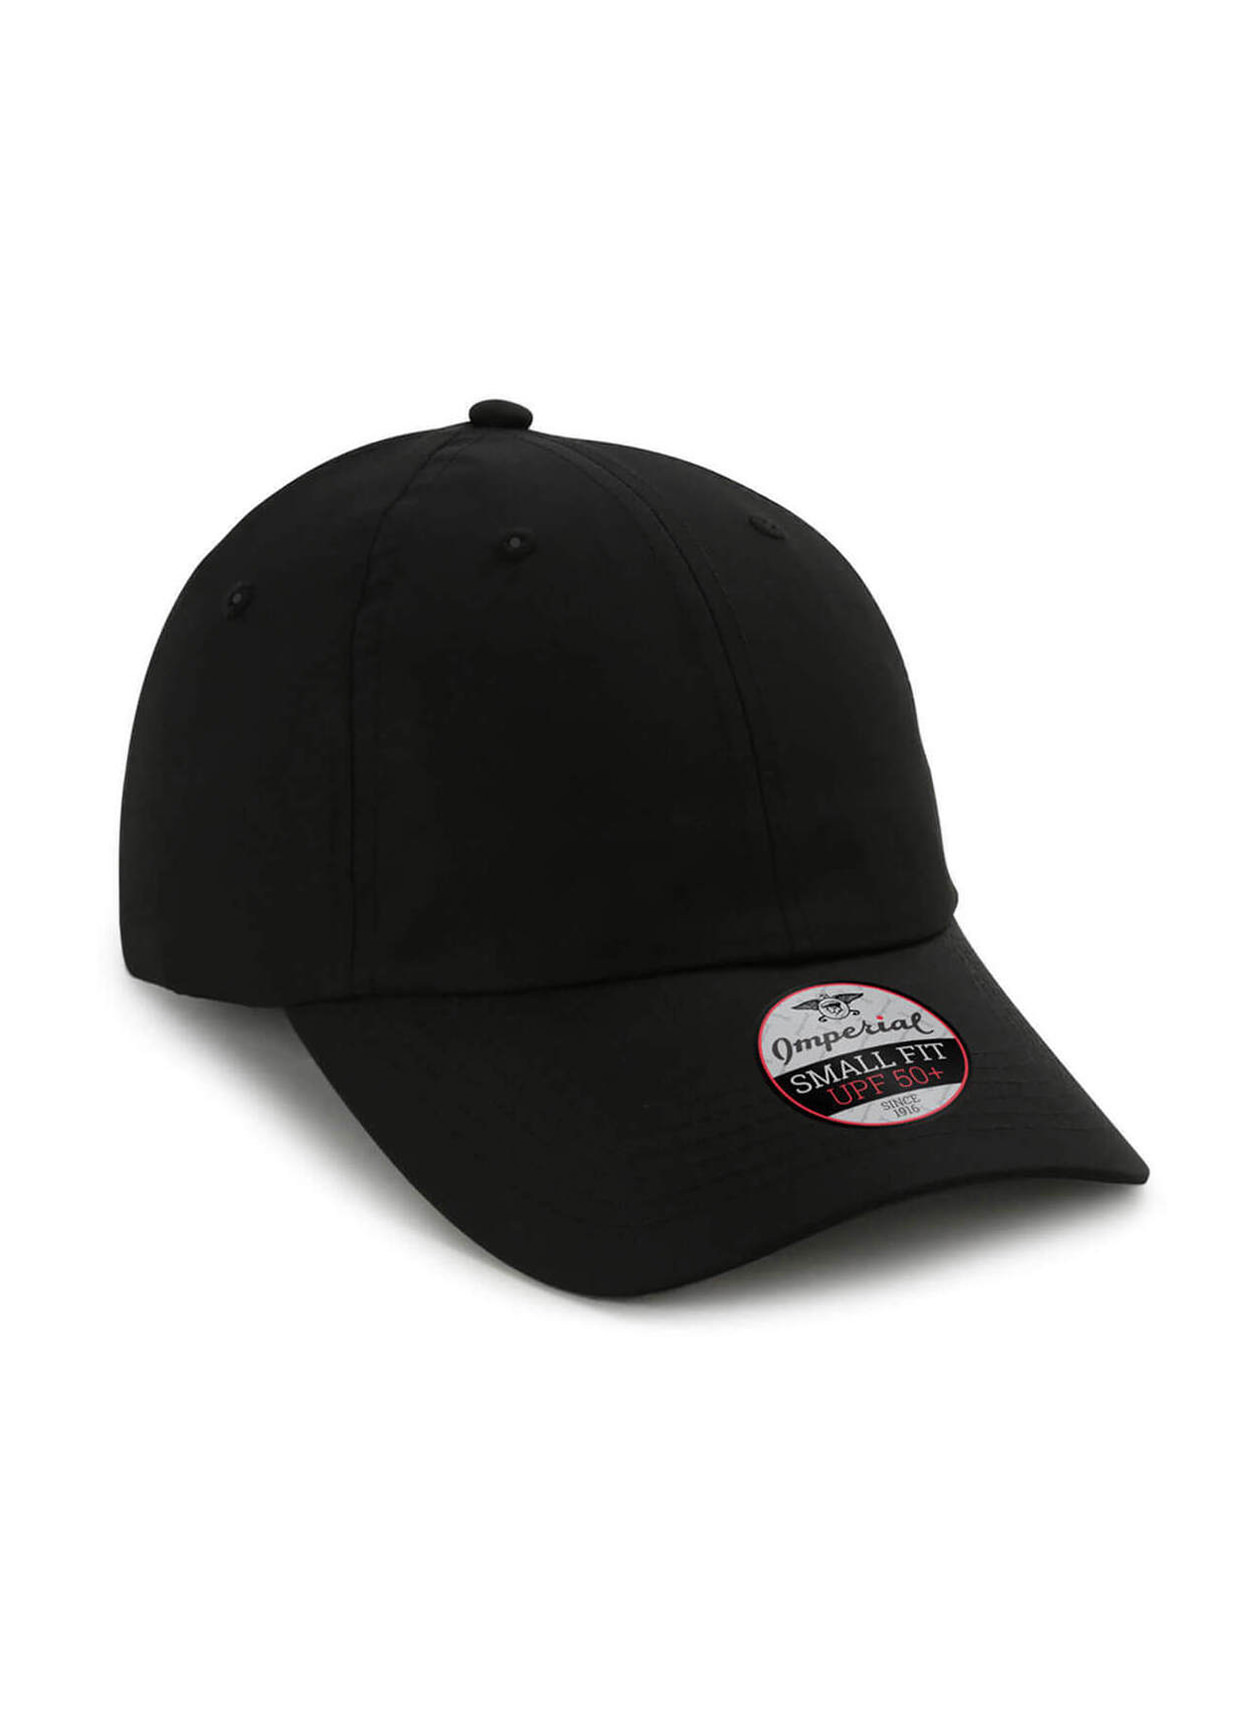 Imperial Black Original Small Fit Performance Hat